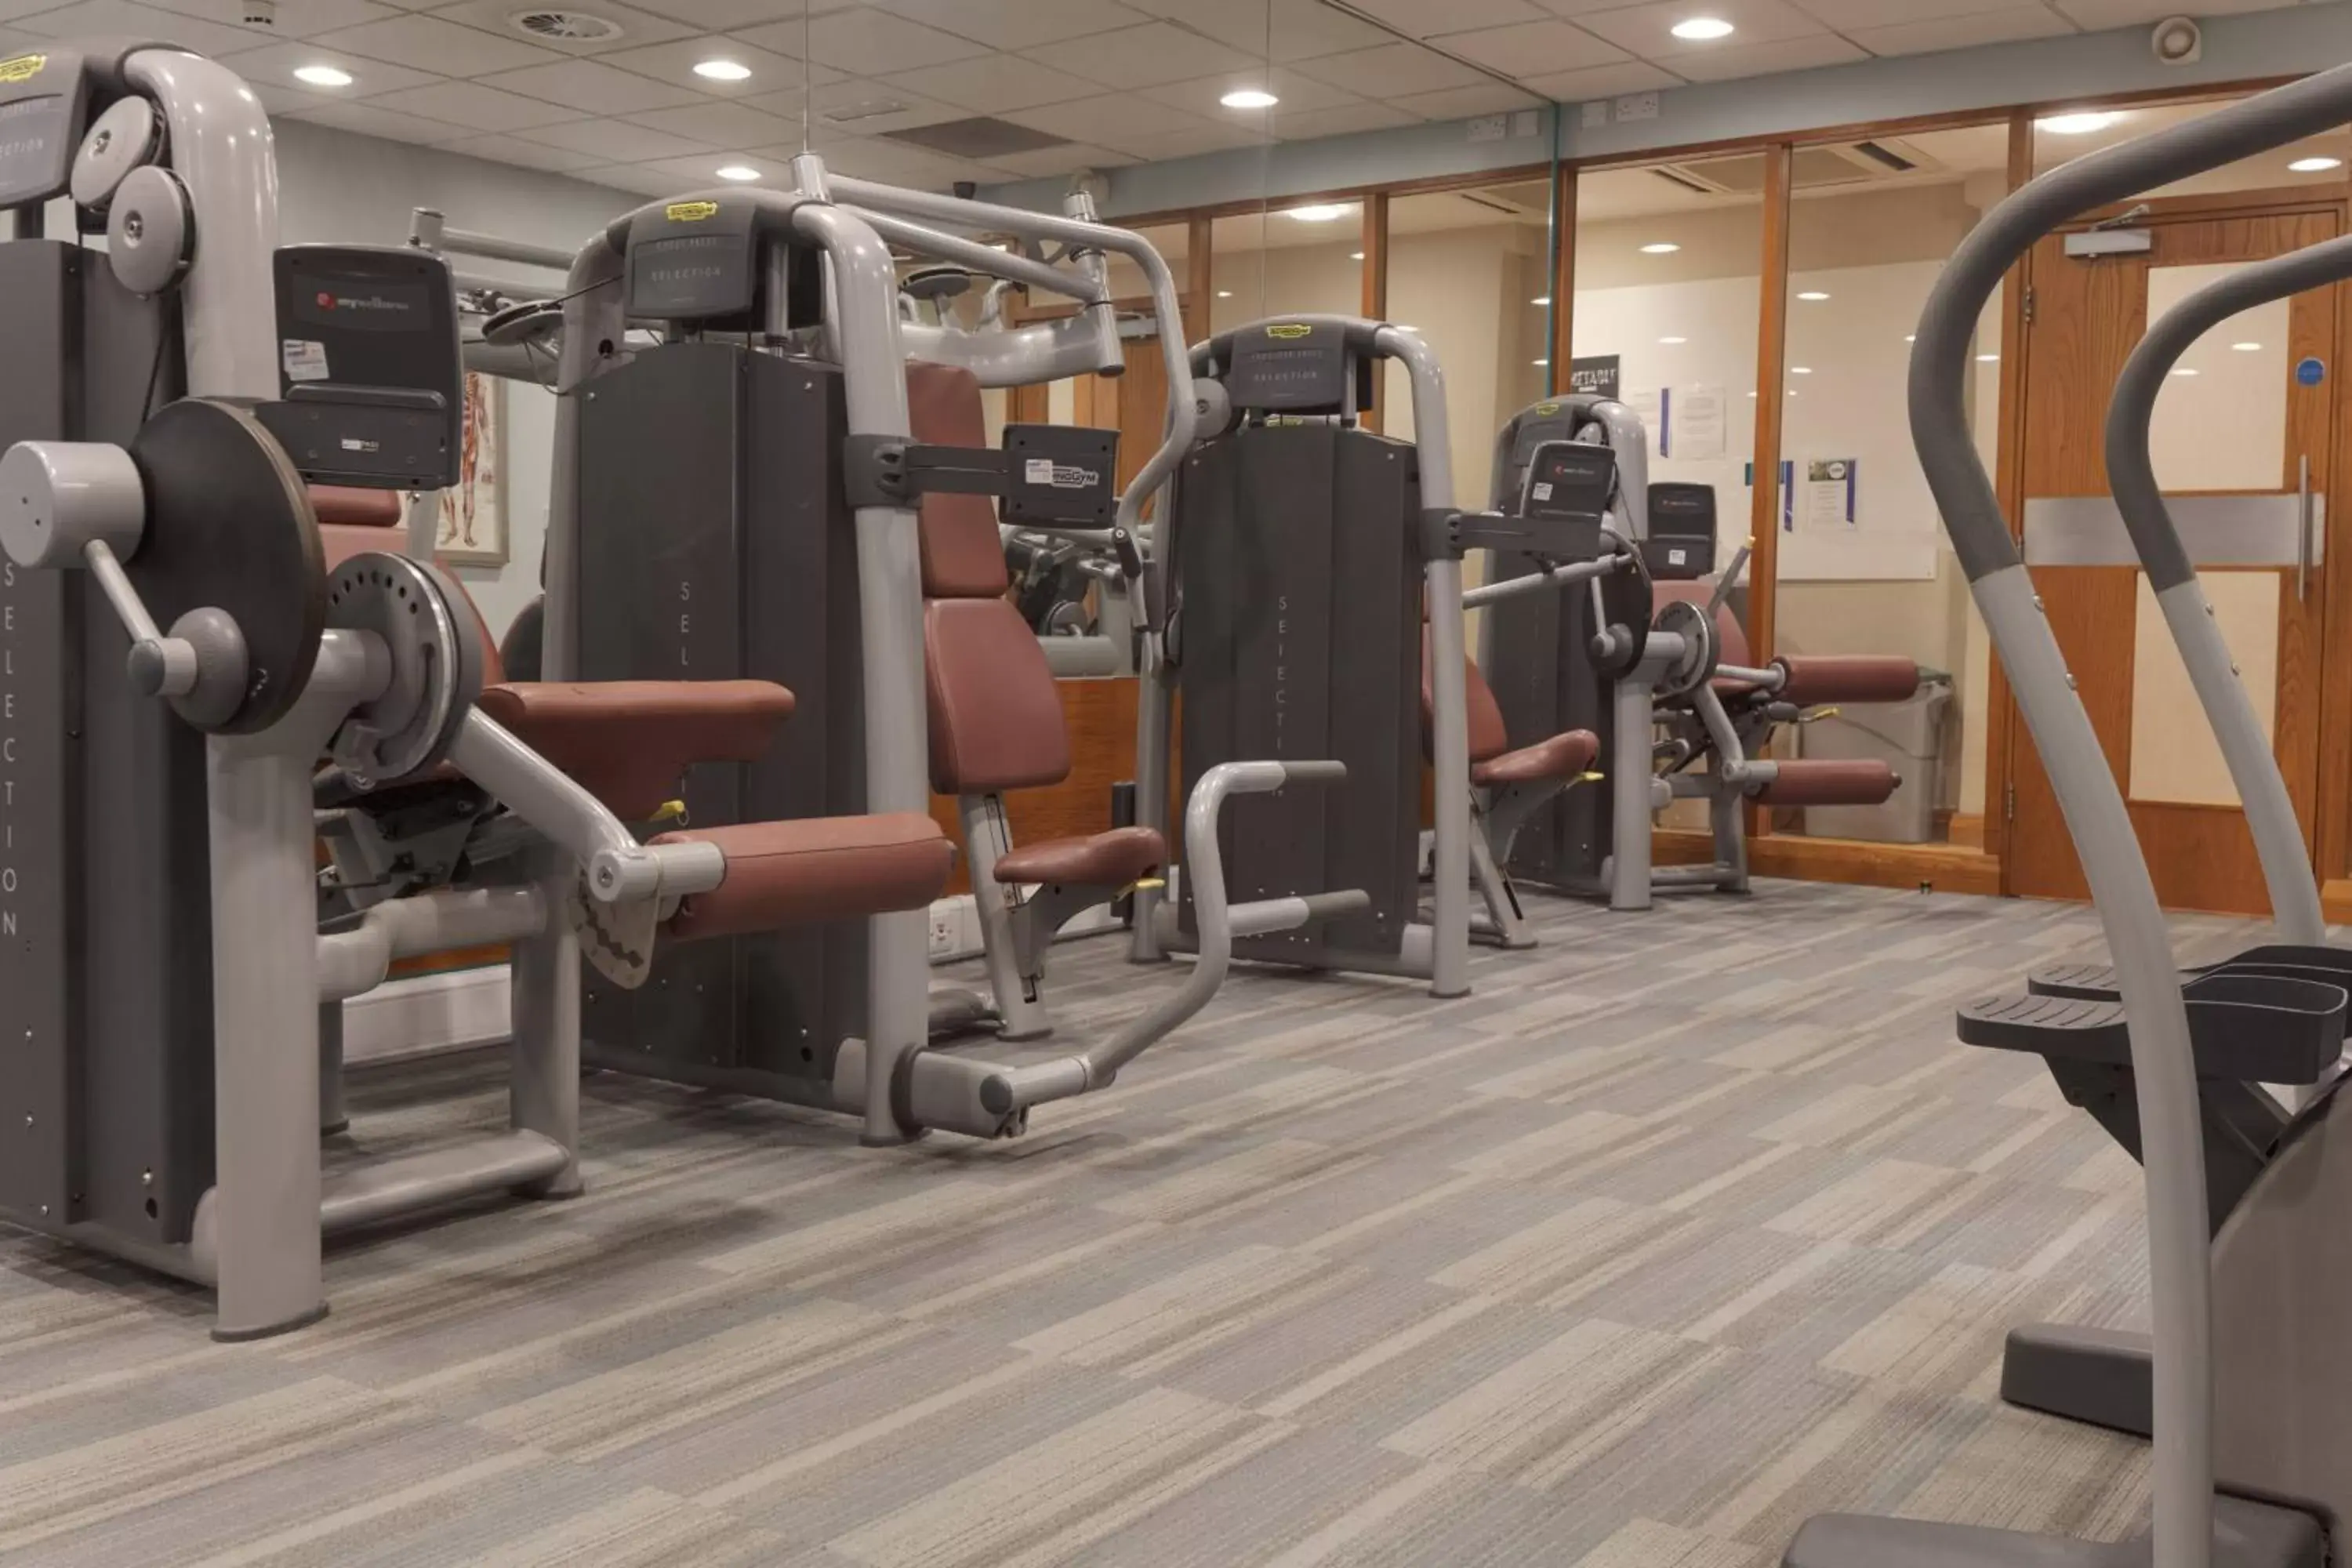 Fitness centre/facilities, Fitness Center/Facilities in Delta Hotels by Marriott Cheltenham Chase